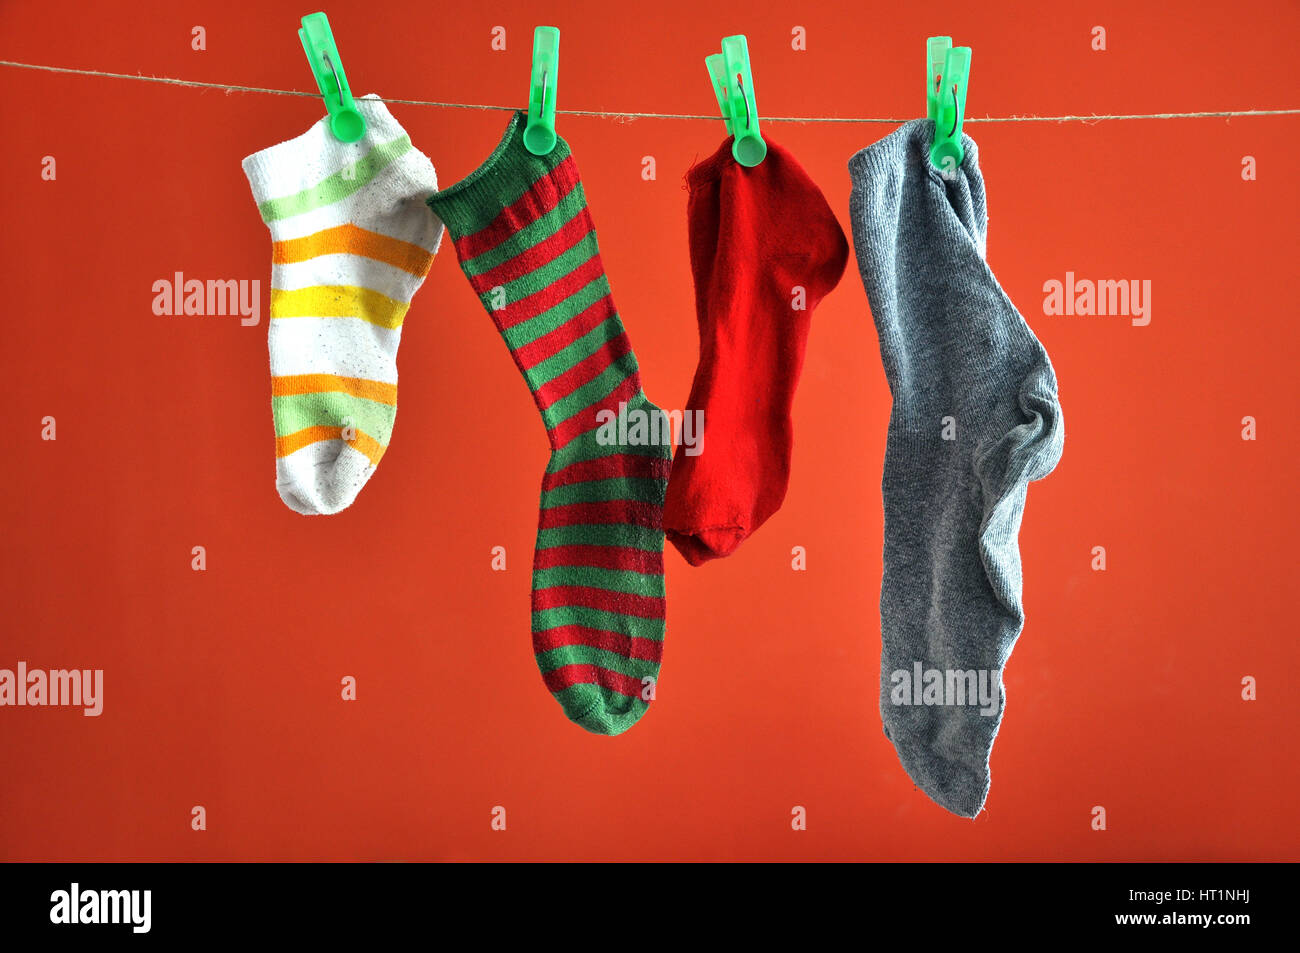 Socks hanging on a rope Stock Photo